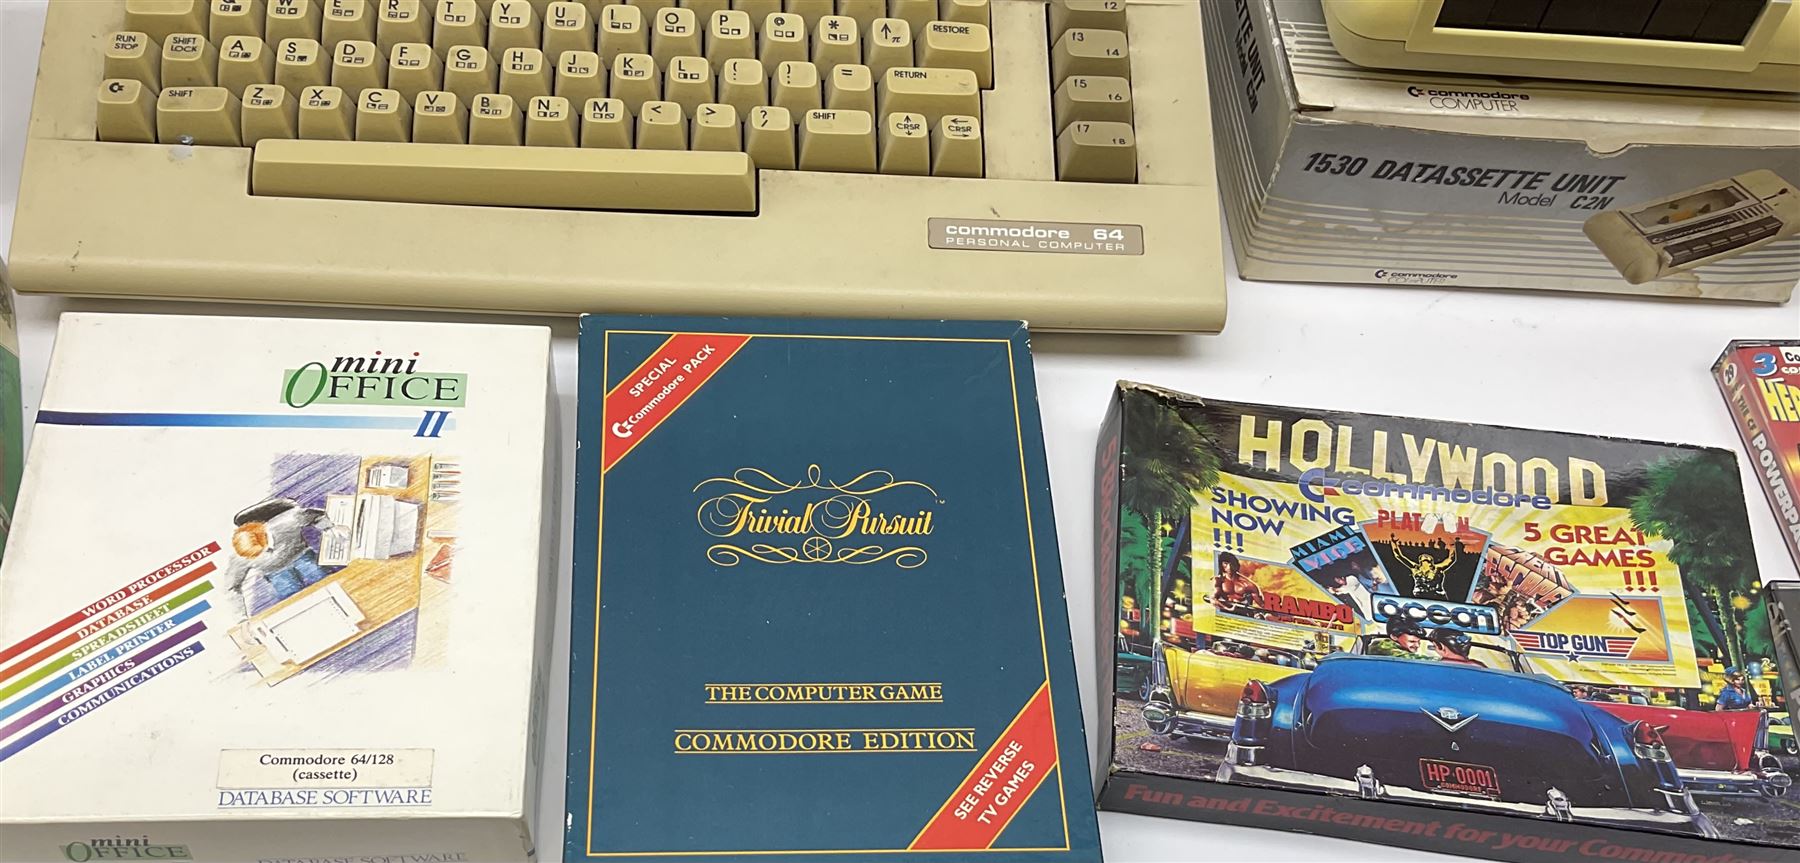 Commodore 64 games computer with boxed 1530 Datassette Unit Model C2N - Image 6 of 8